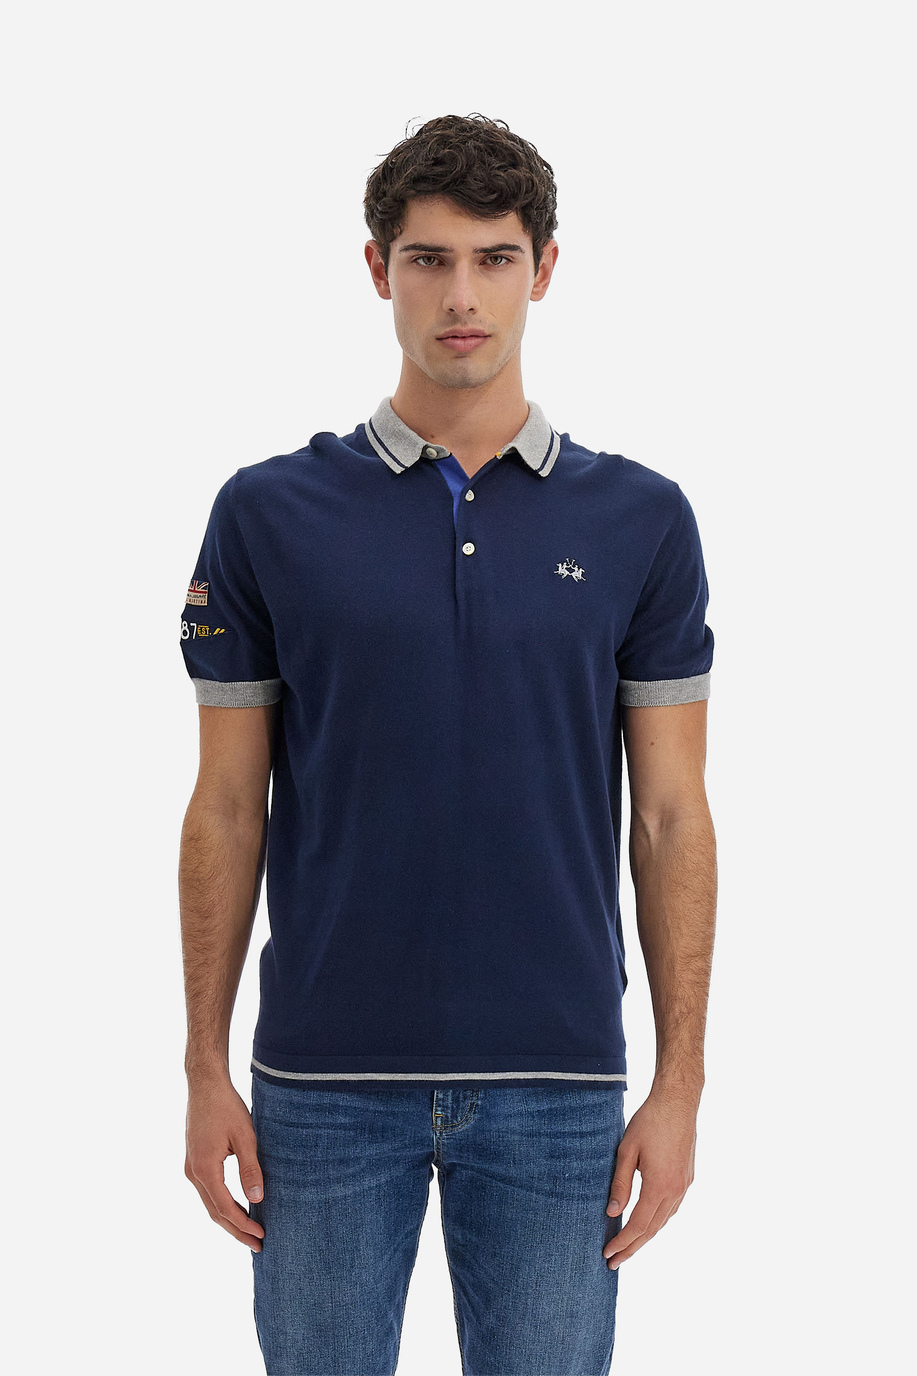 Short-sleeved men's tricot polo in solid color - Victorin - Polo Shirts | La Martina - Official Online Shop